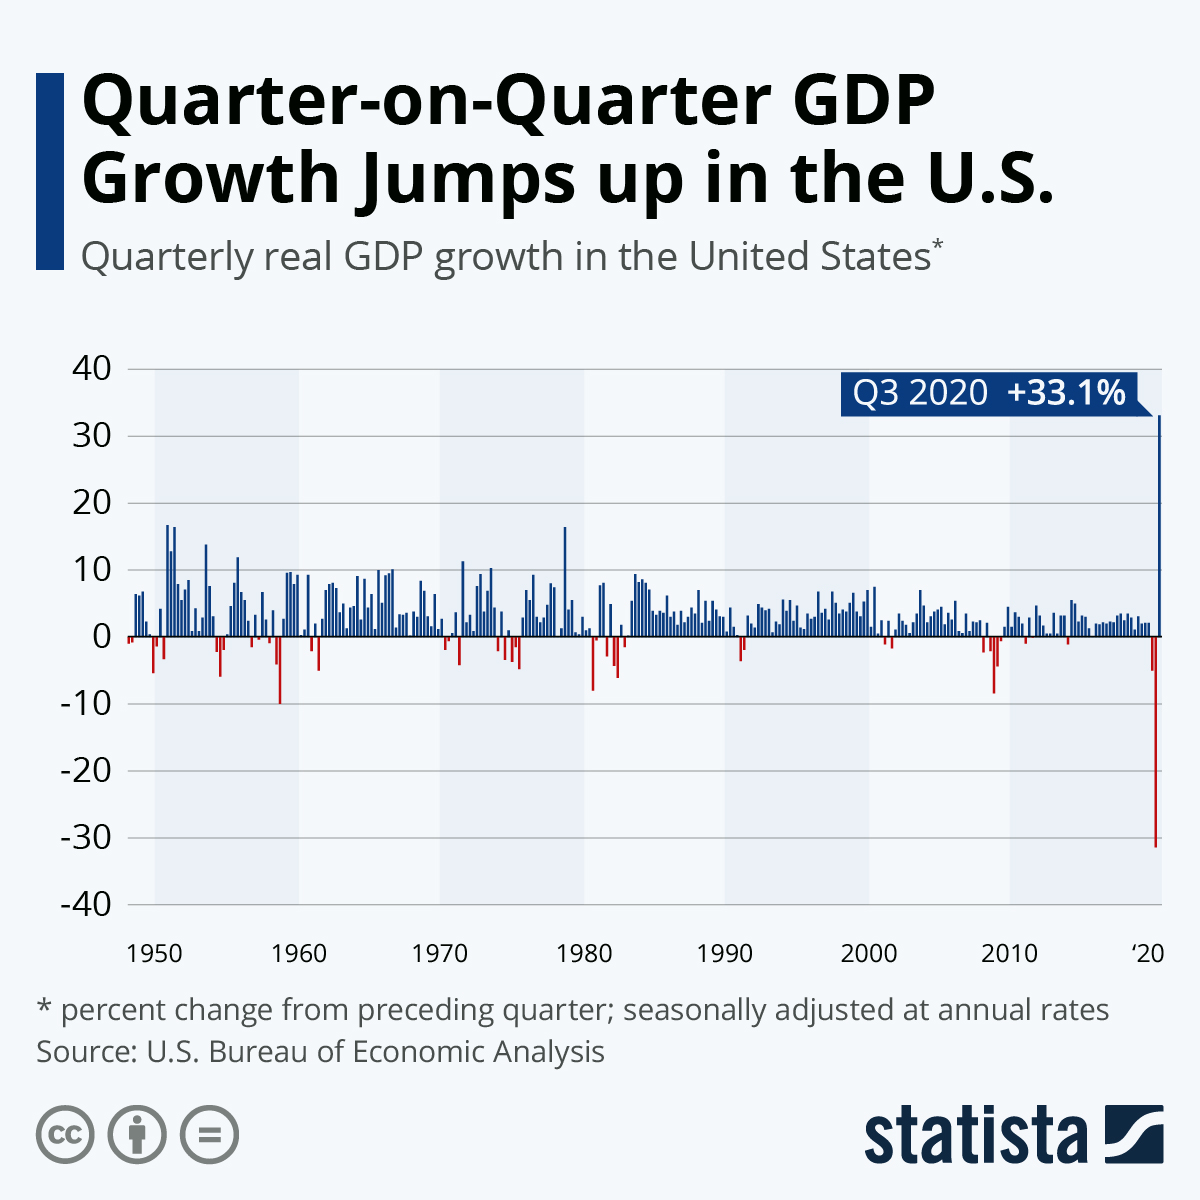 After Record Decline, QuarteronQuarter GDP Growth Jumps to Record High in US The Sounding Line